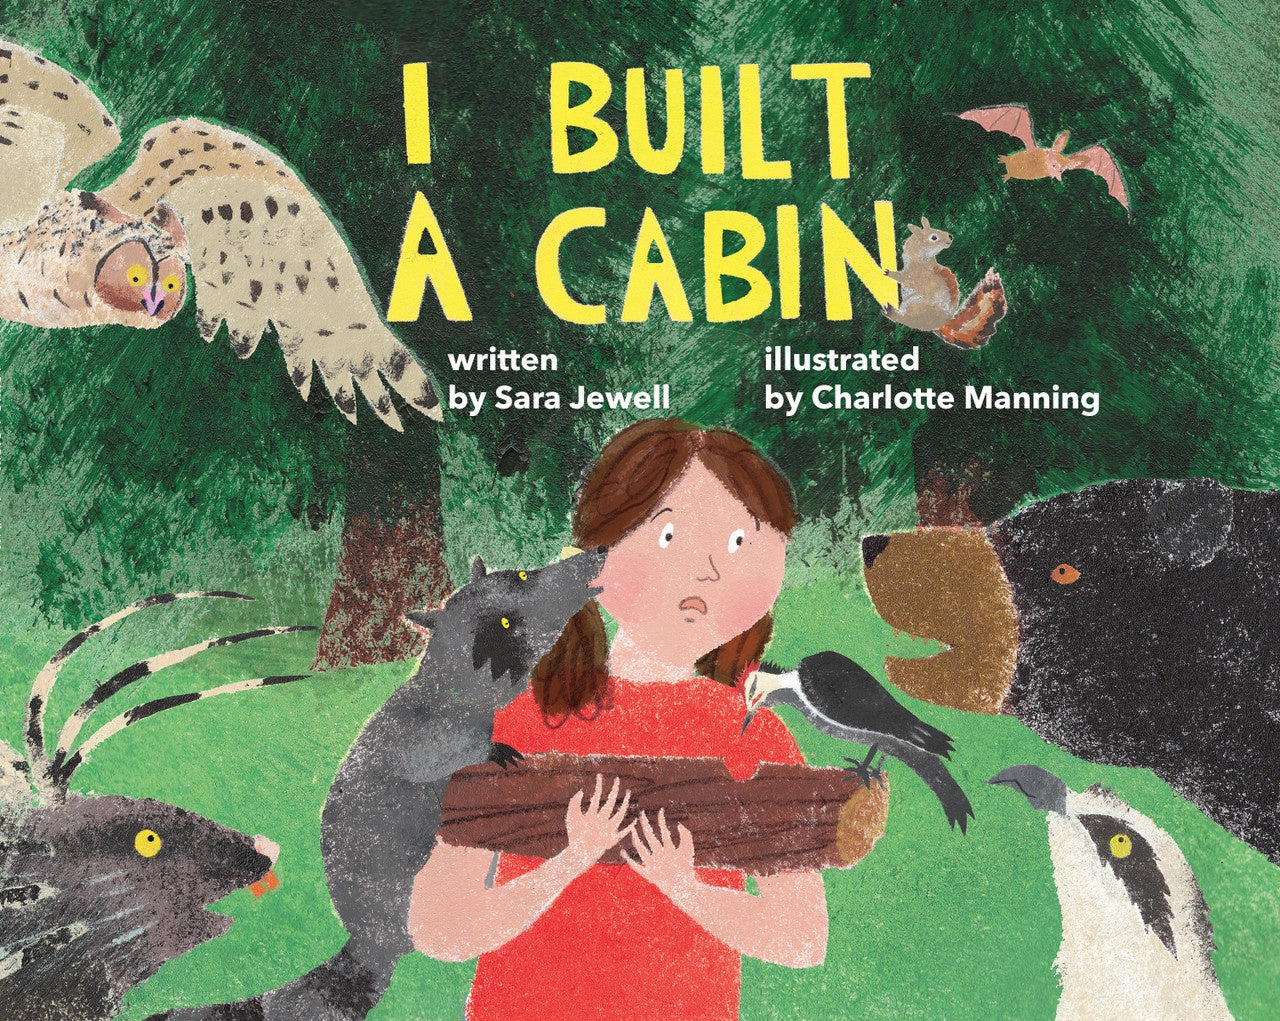 'I Built a Cabin' by Sara Jewell